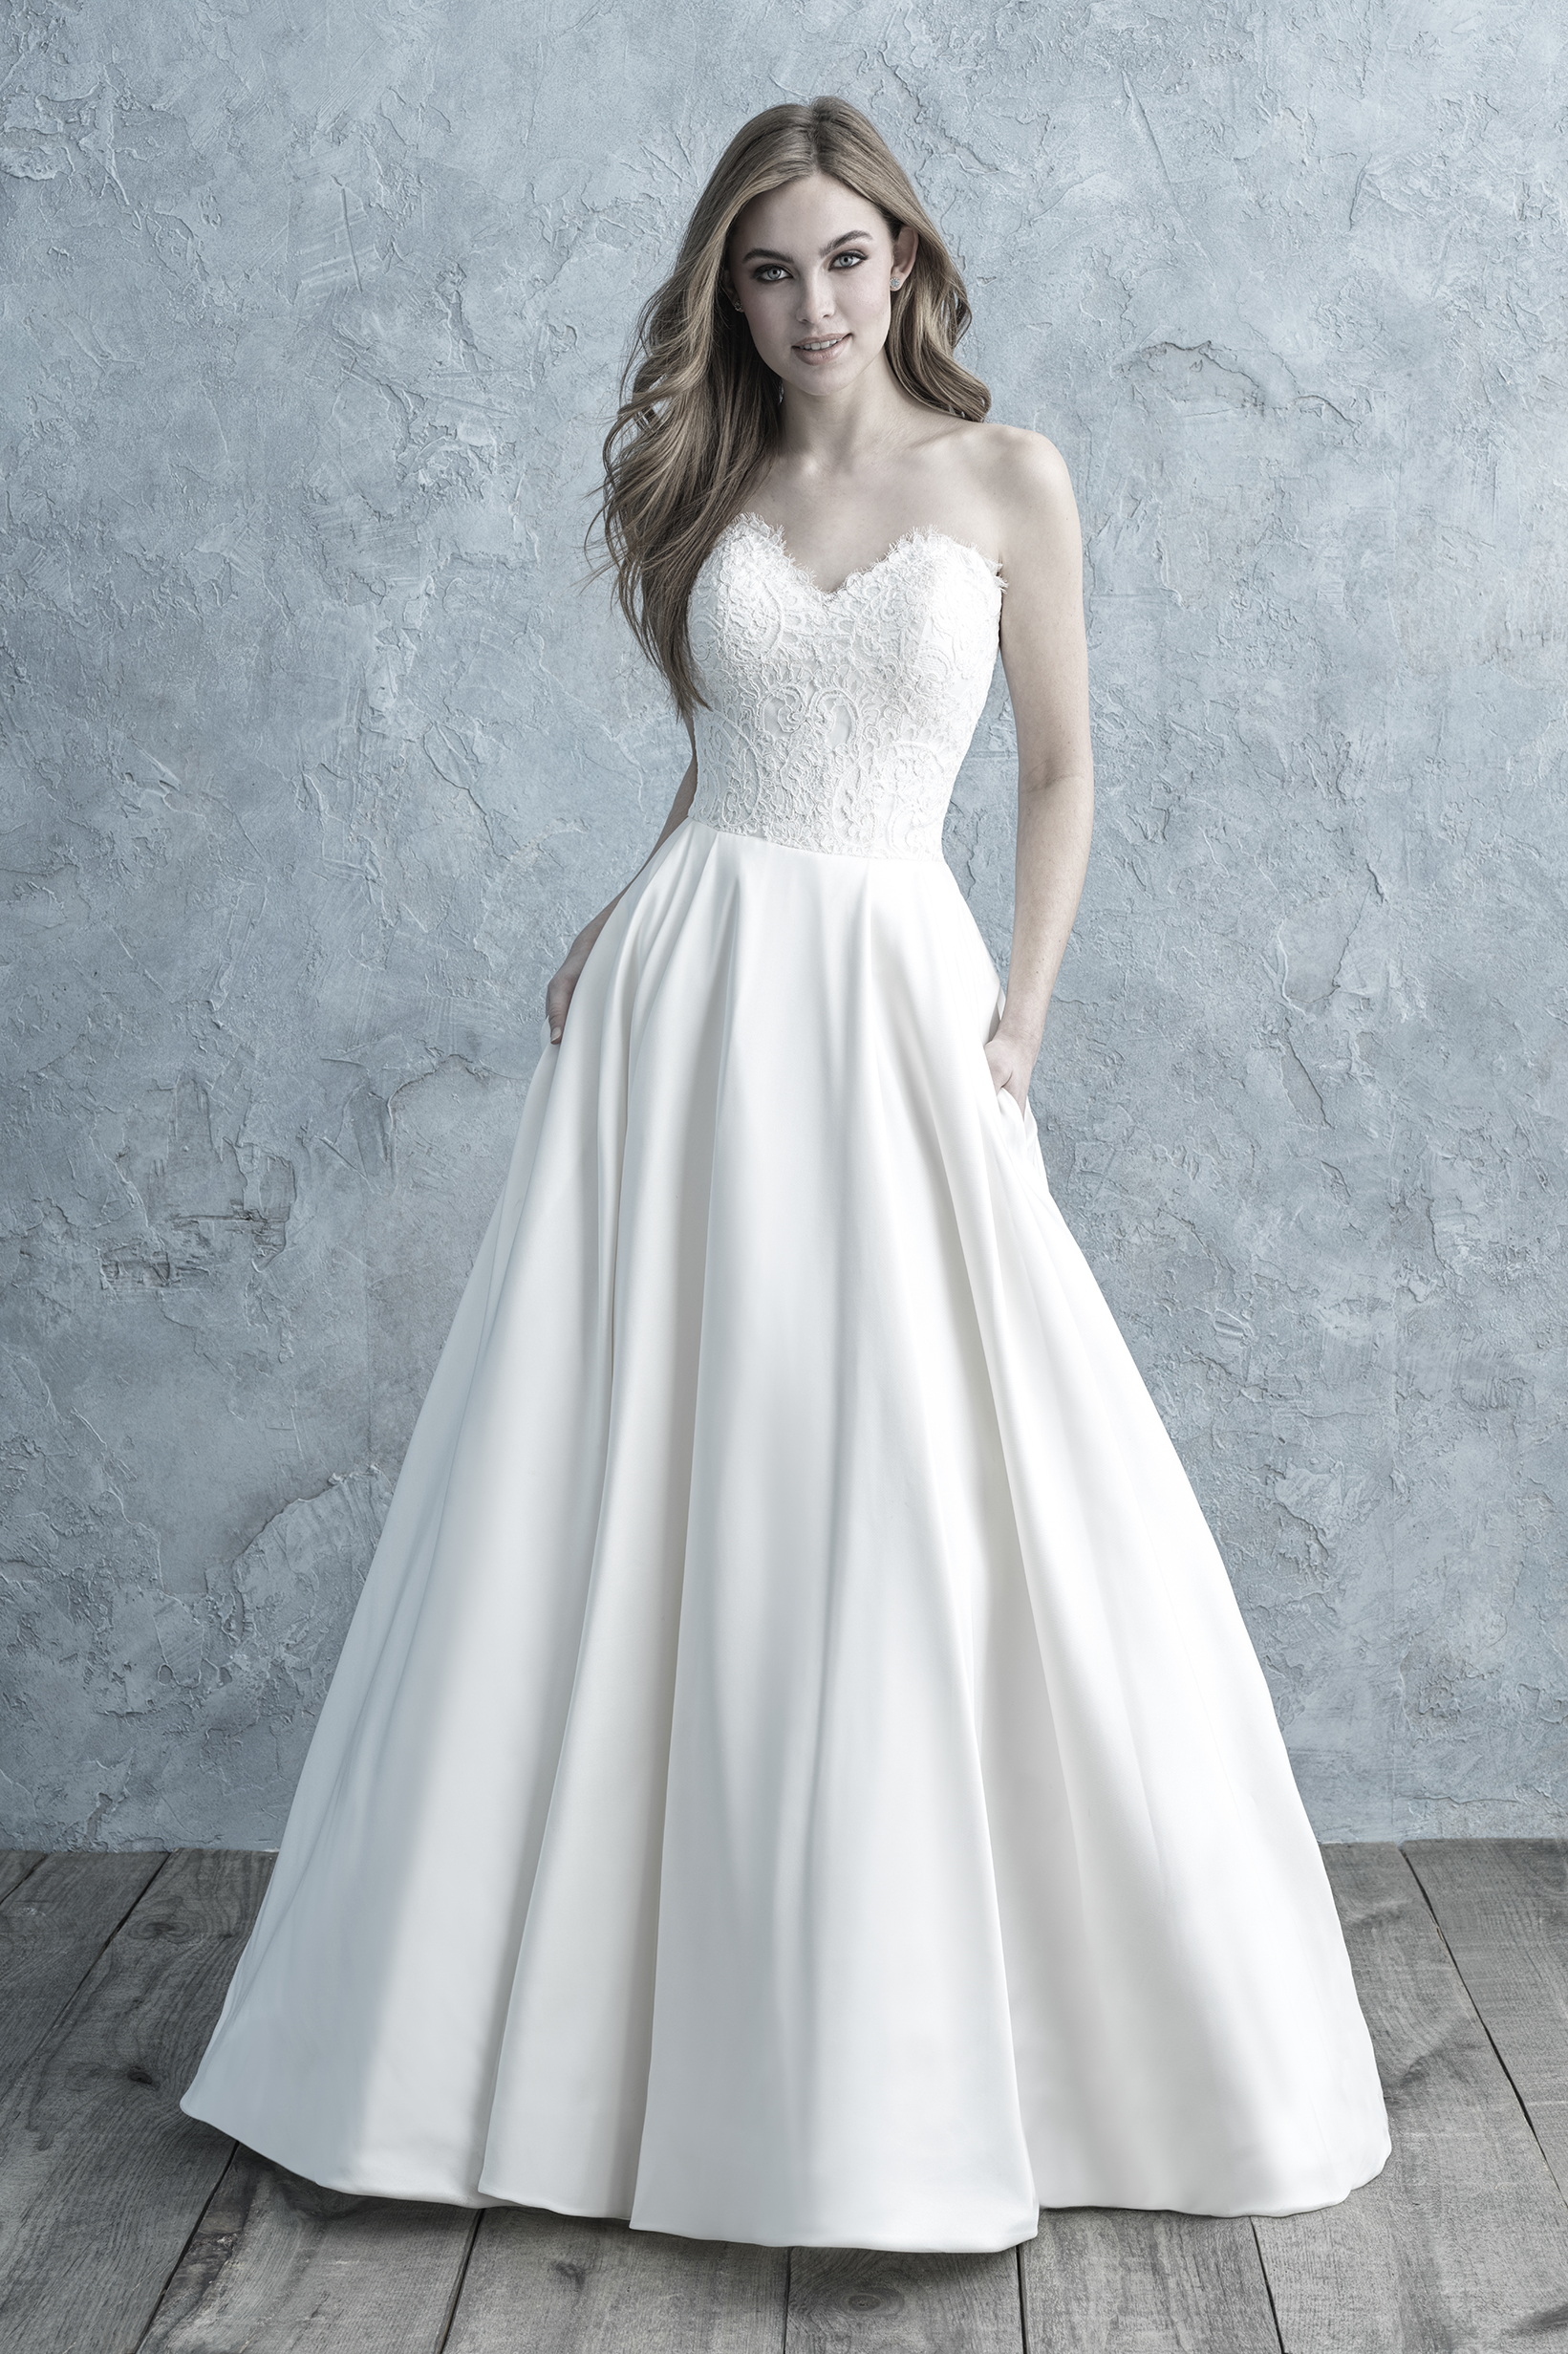 The Dreamy 9677 Allure Bridals Wedding Dress Is Available Bos Now